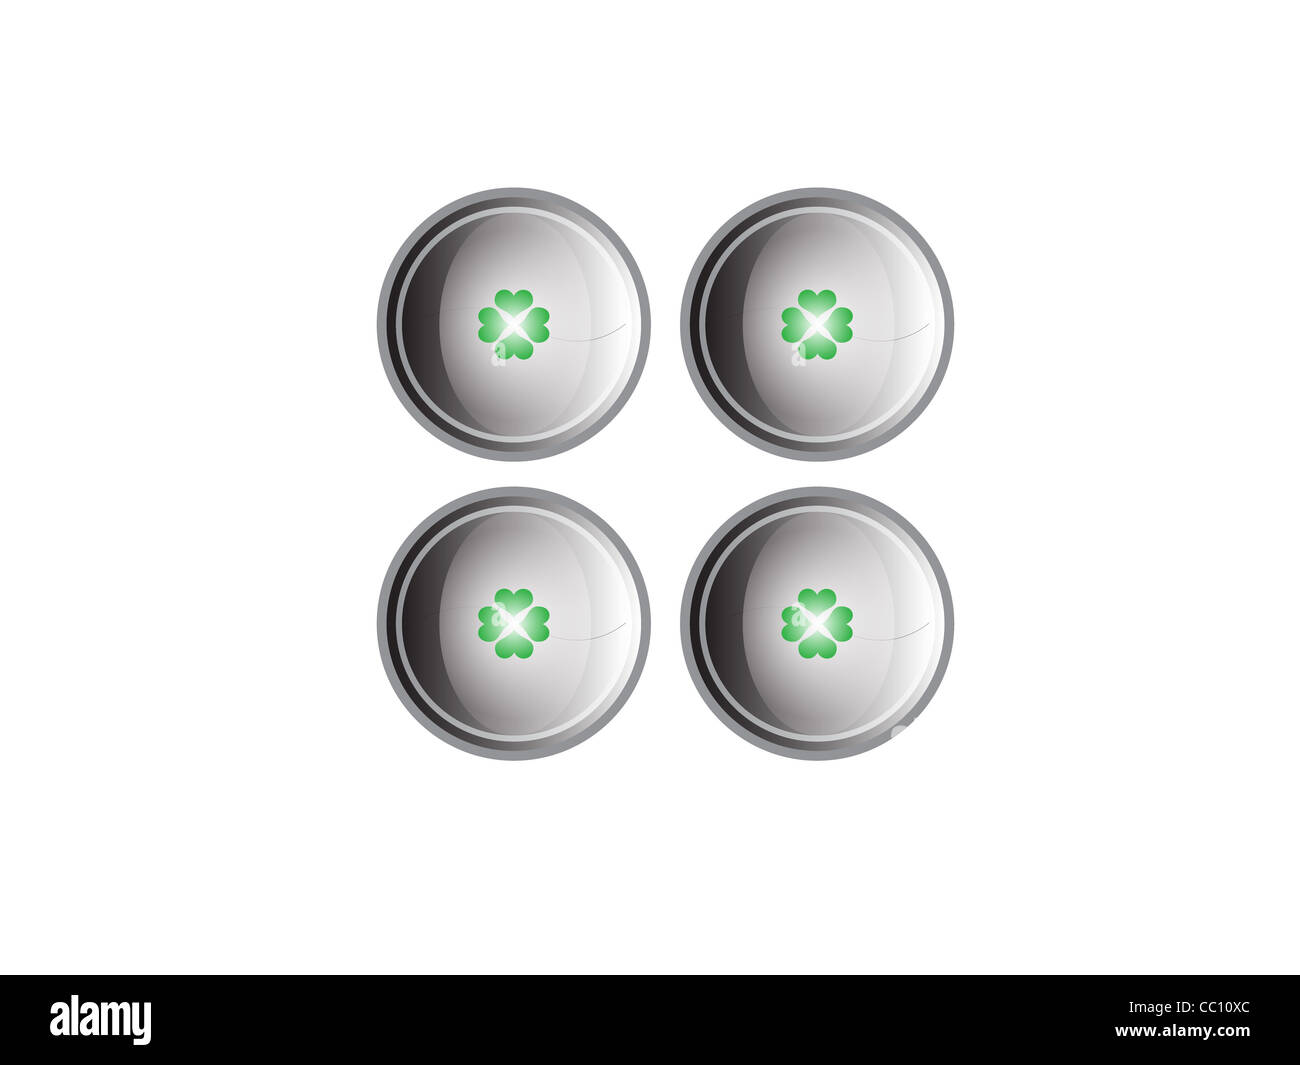 The buttons with green clovers Stock Photo